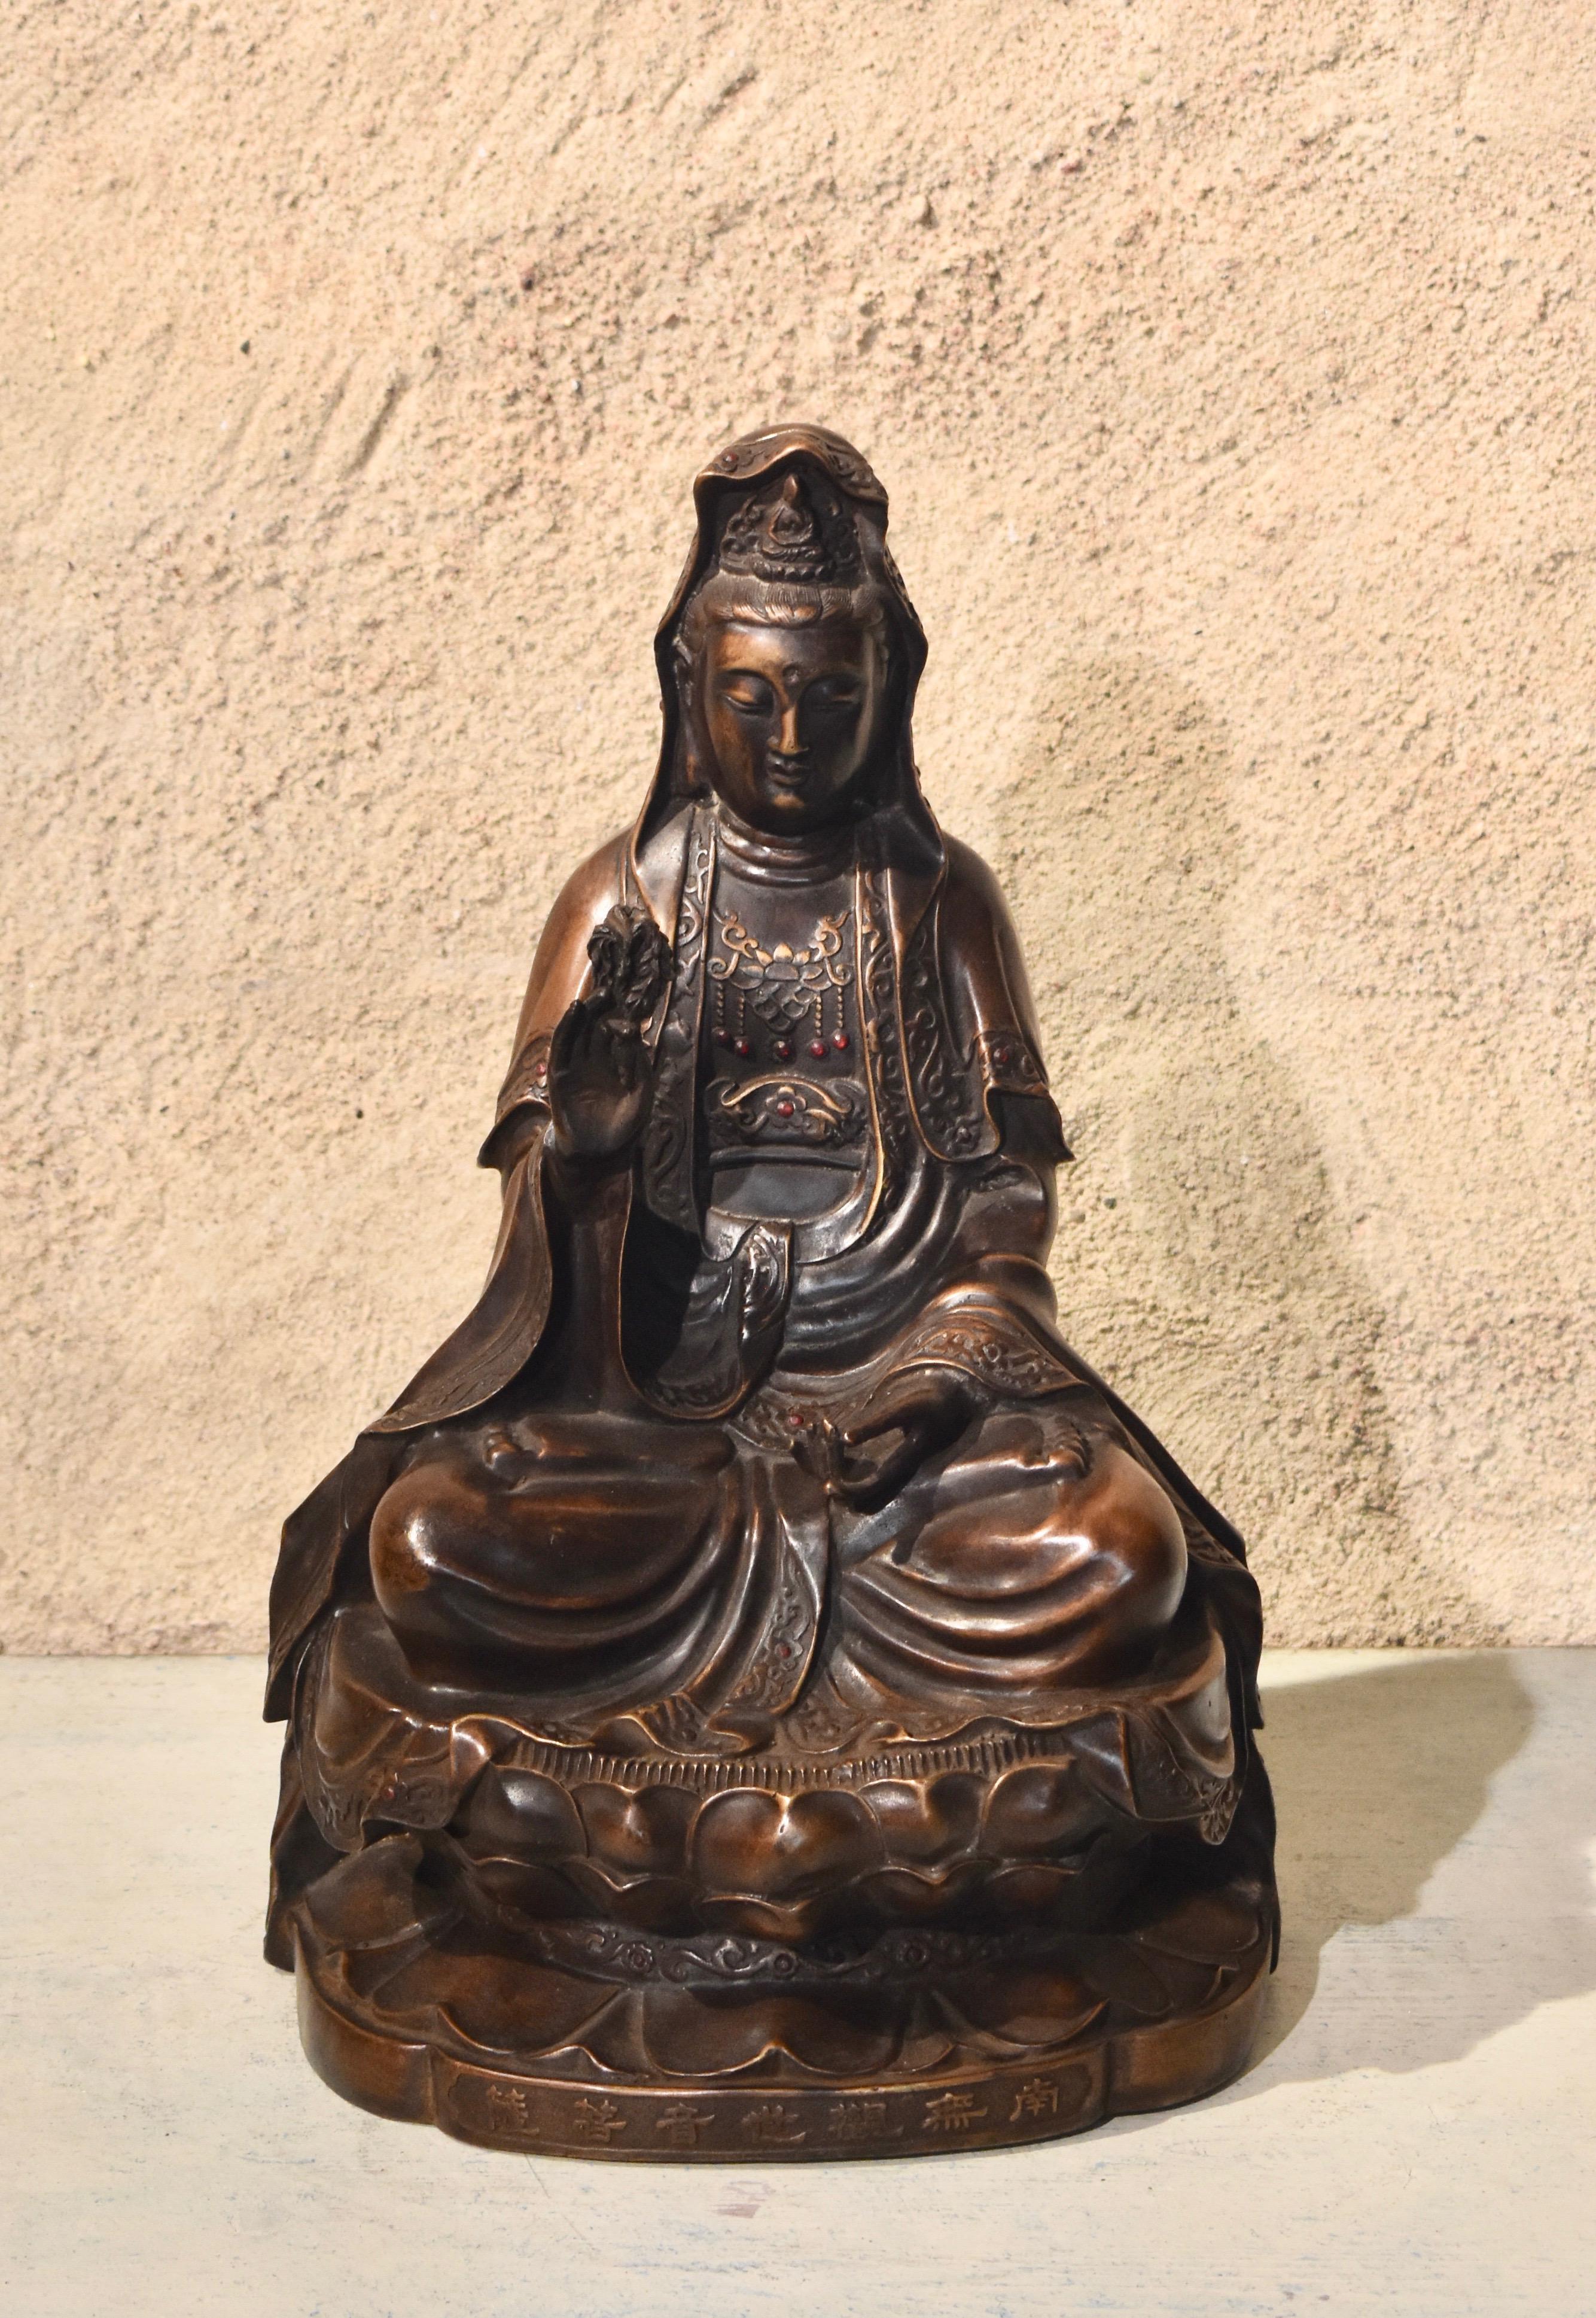 Chinese 19th century Buddha sculpture in bronze with red stones and inscription.
Untouched condition original patina
Dates circa mid-late 1800s

 